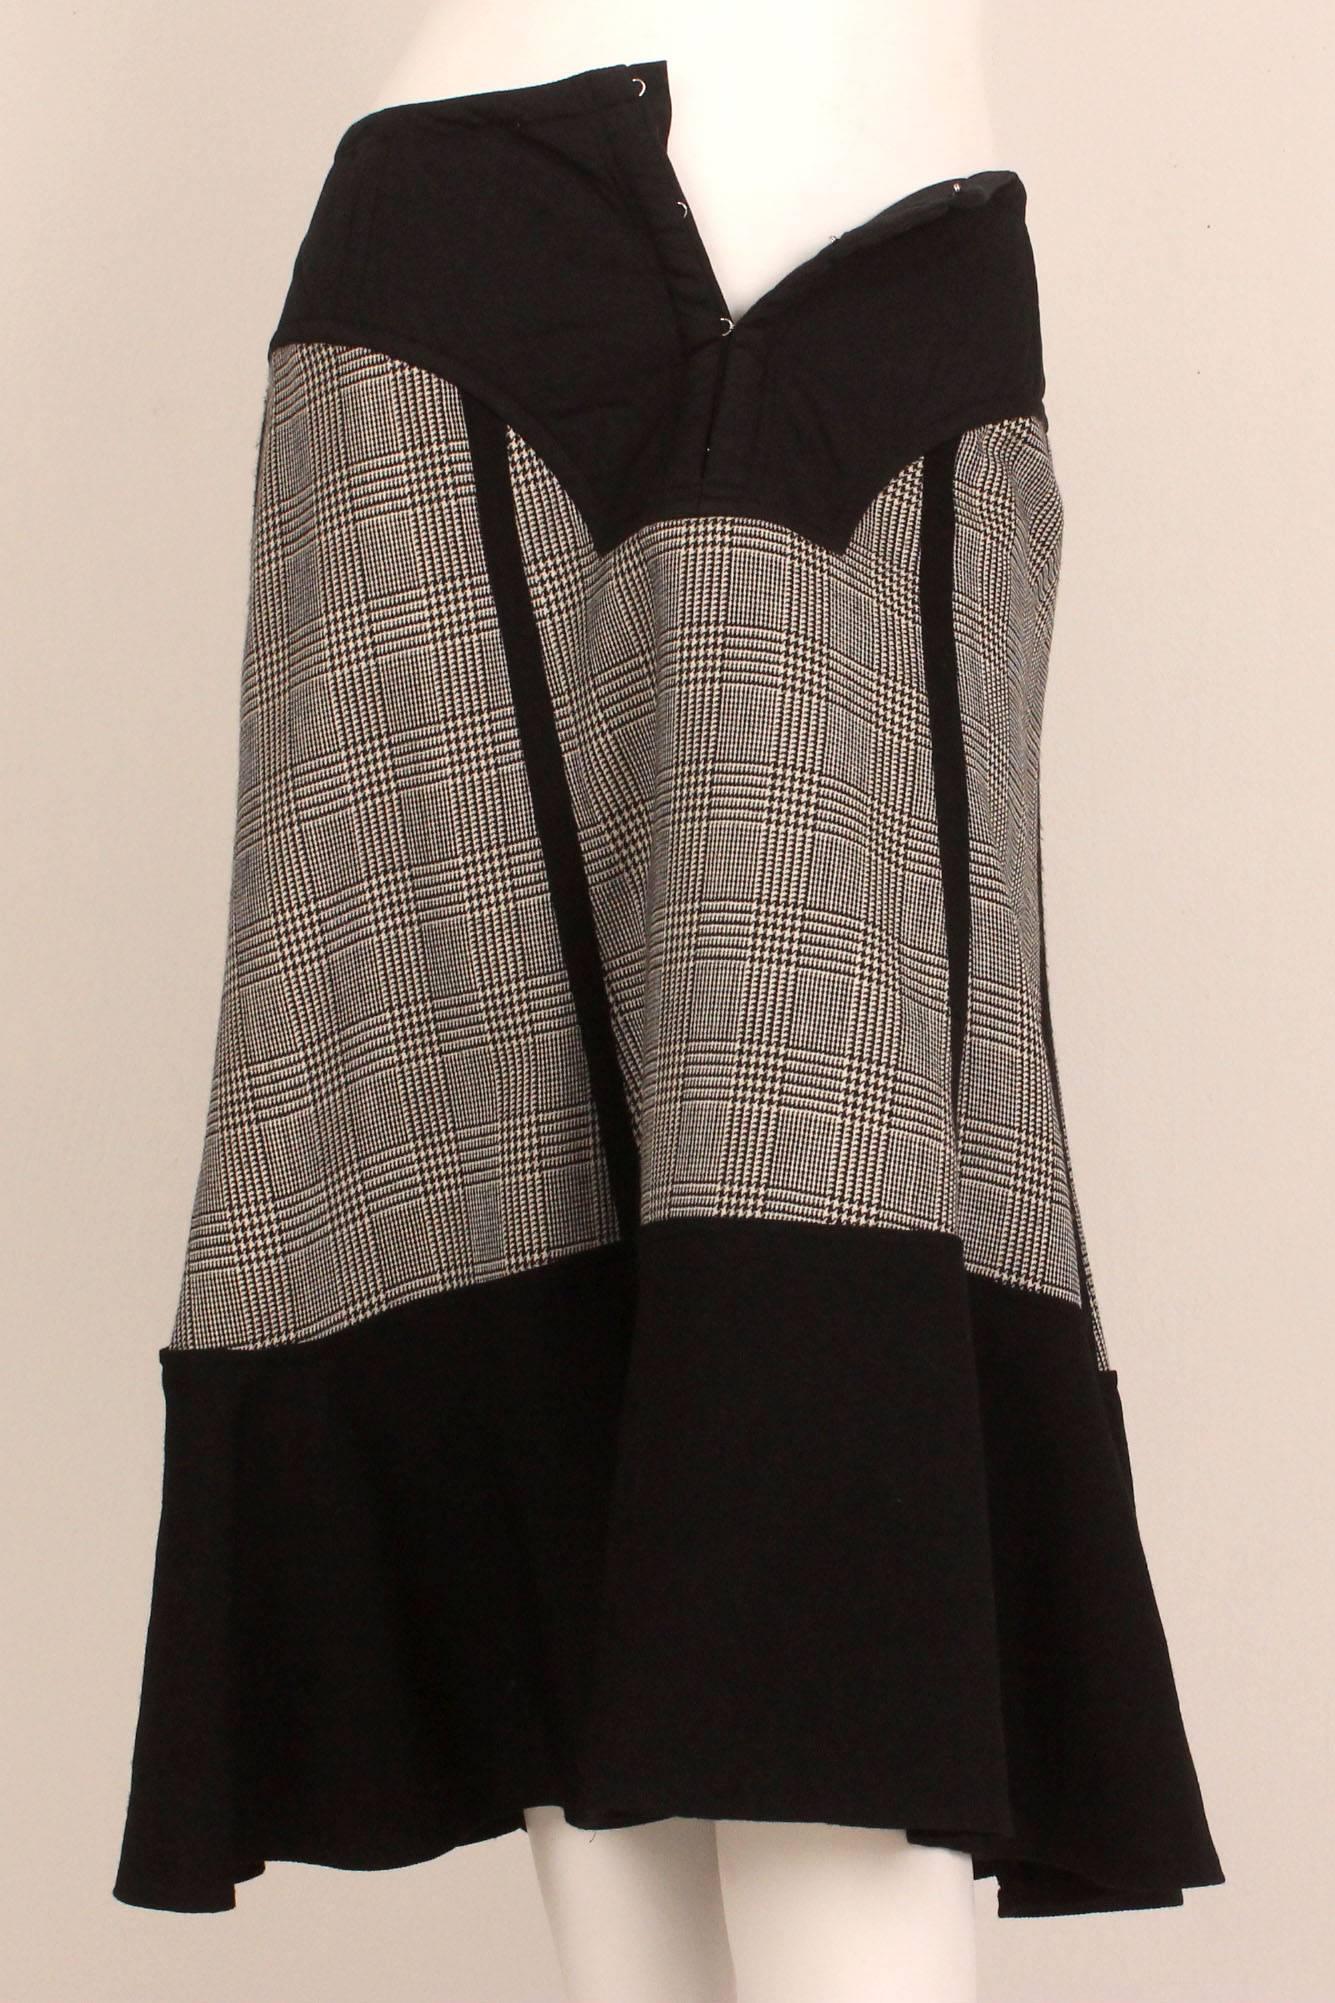 This Comme des Garcons A line skirt has wonderful details. The skirt is made up of three fabrics.  The form fitting elongated waistband is quilted cotton and attached to it is a fine herringbone wool. The last fabric forms a wide hem and is in a